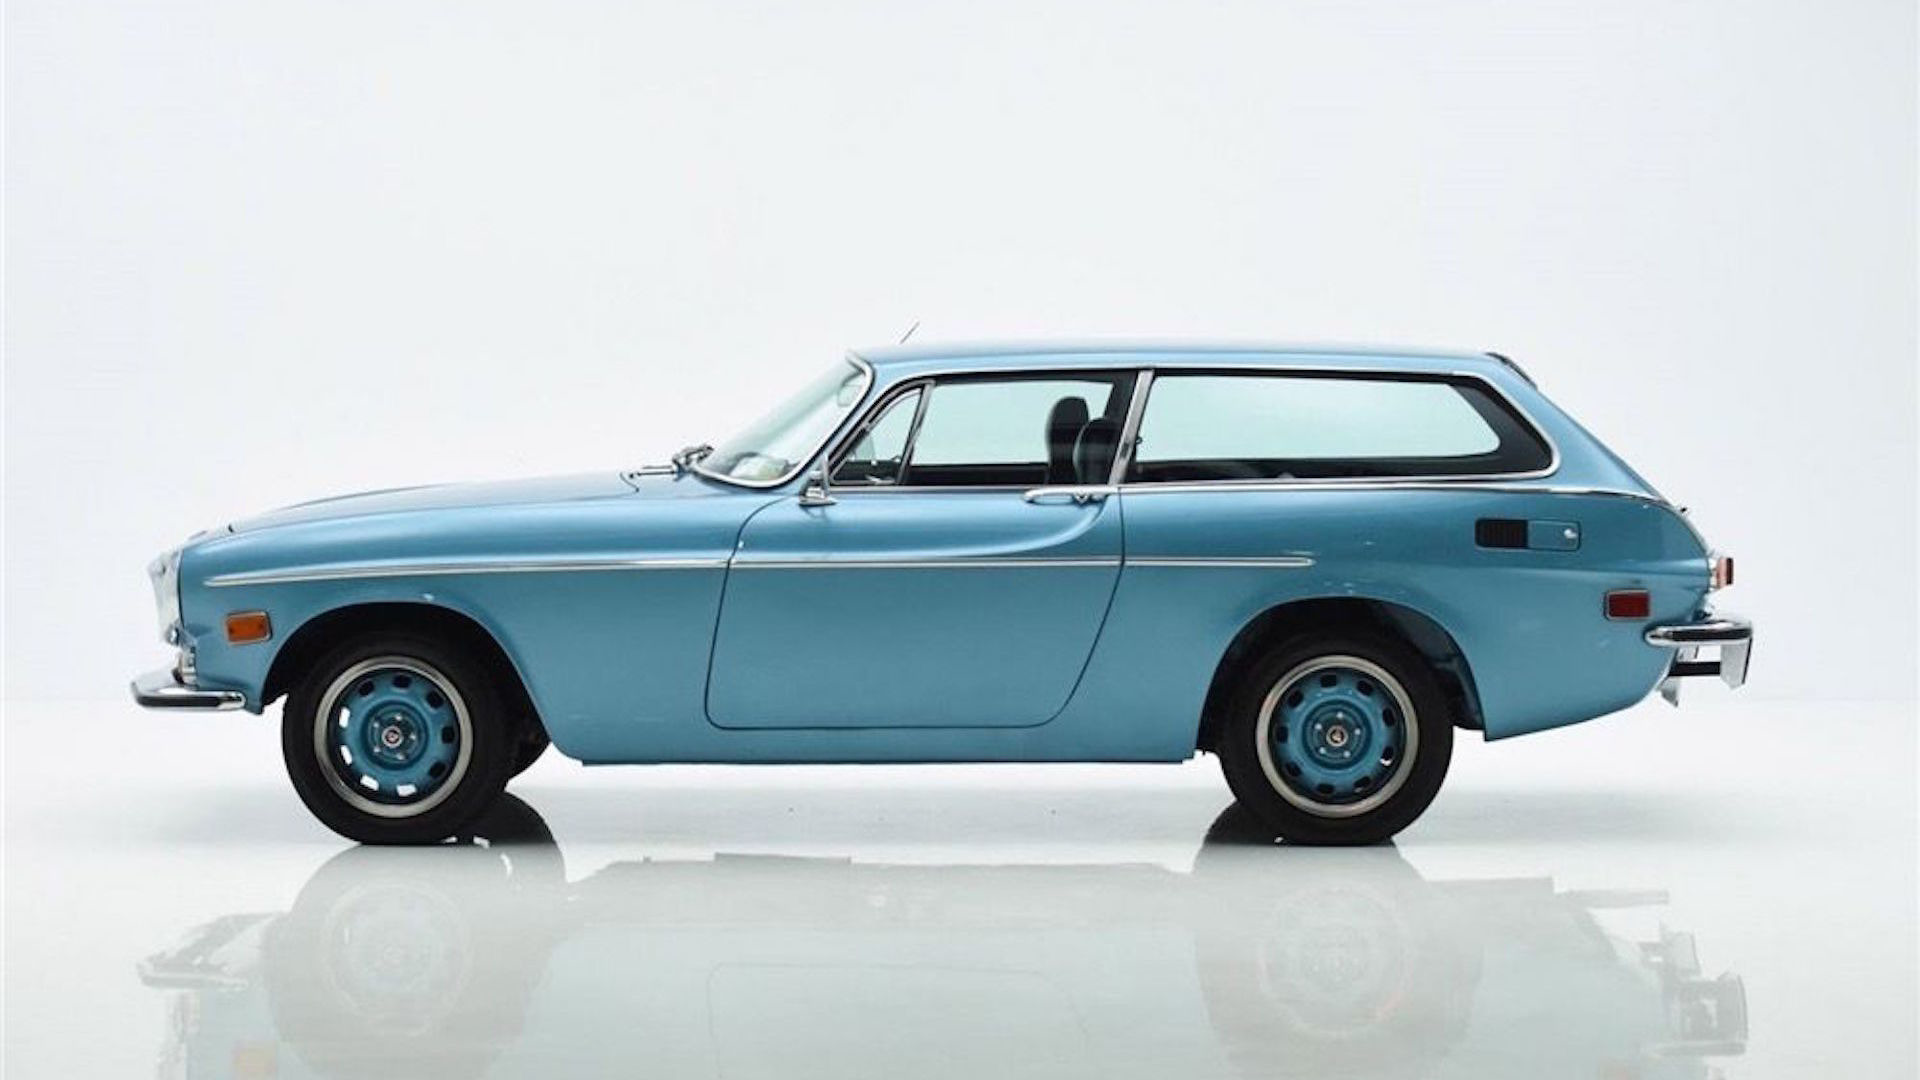 Volvo 1800 ES eBay find is a sweet Swede in bodacious blue